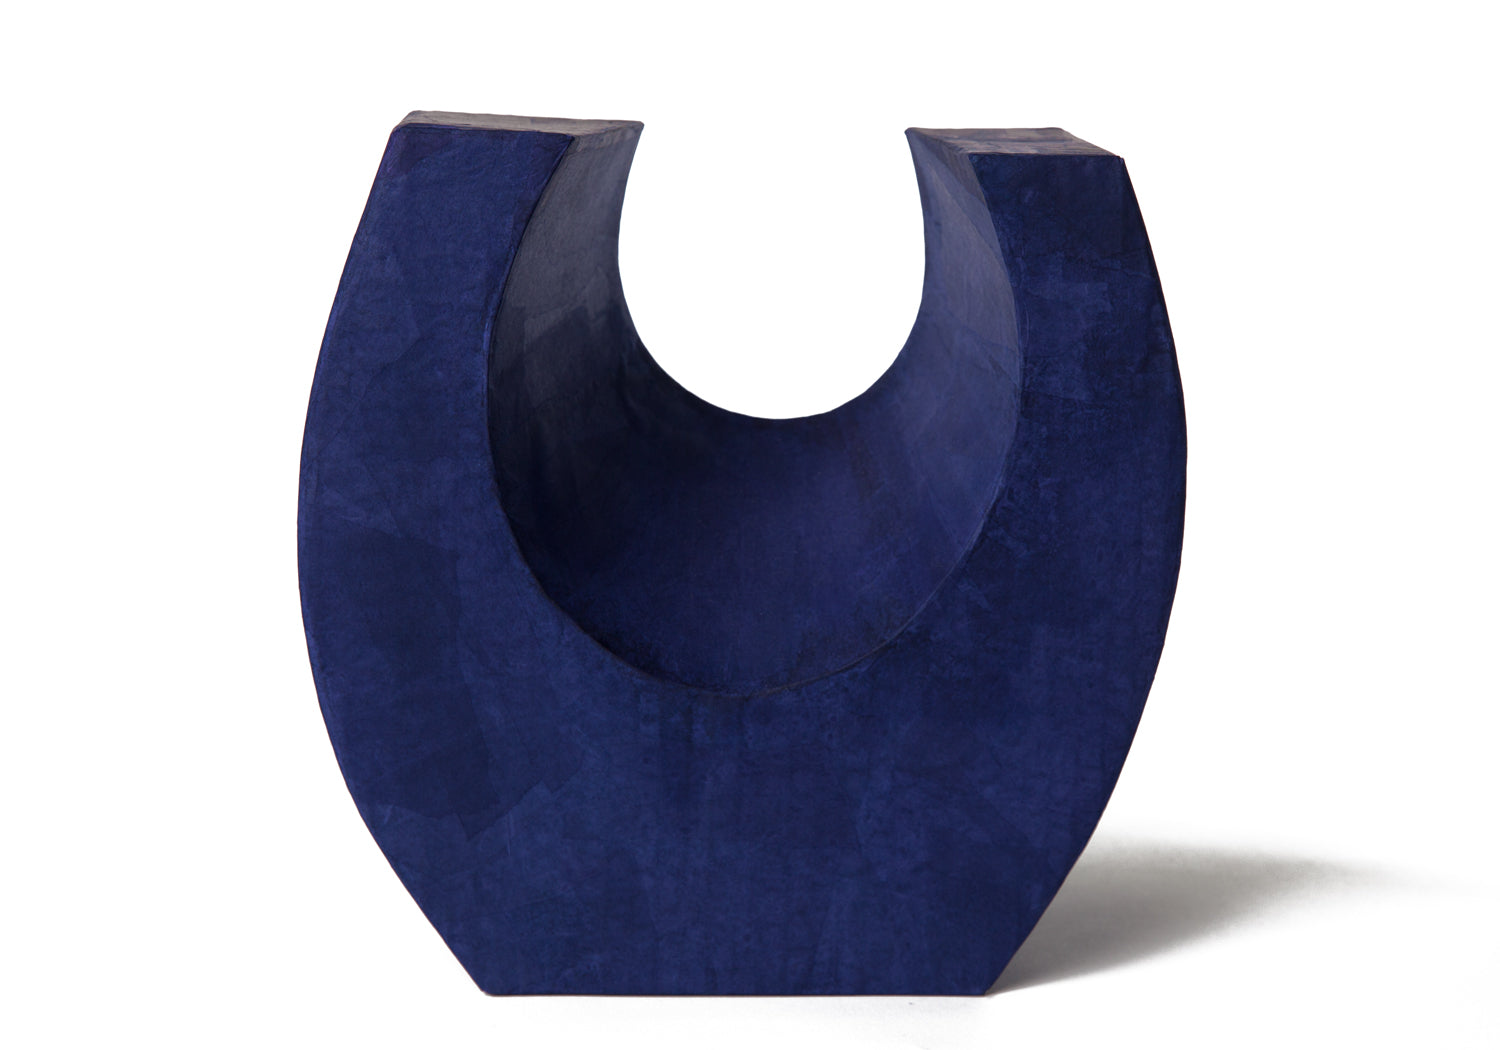 Picture of a beautiful purple horseshoe shaped biodegradable paper cremation urn on sale at Muses Design Urns. Front view.